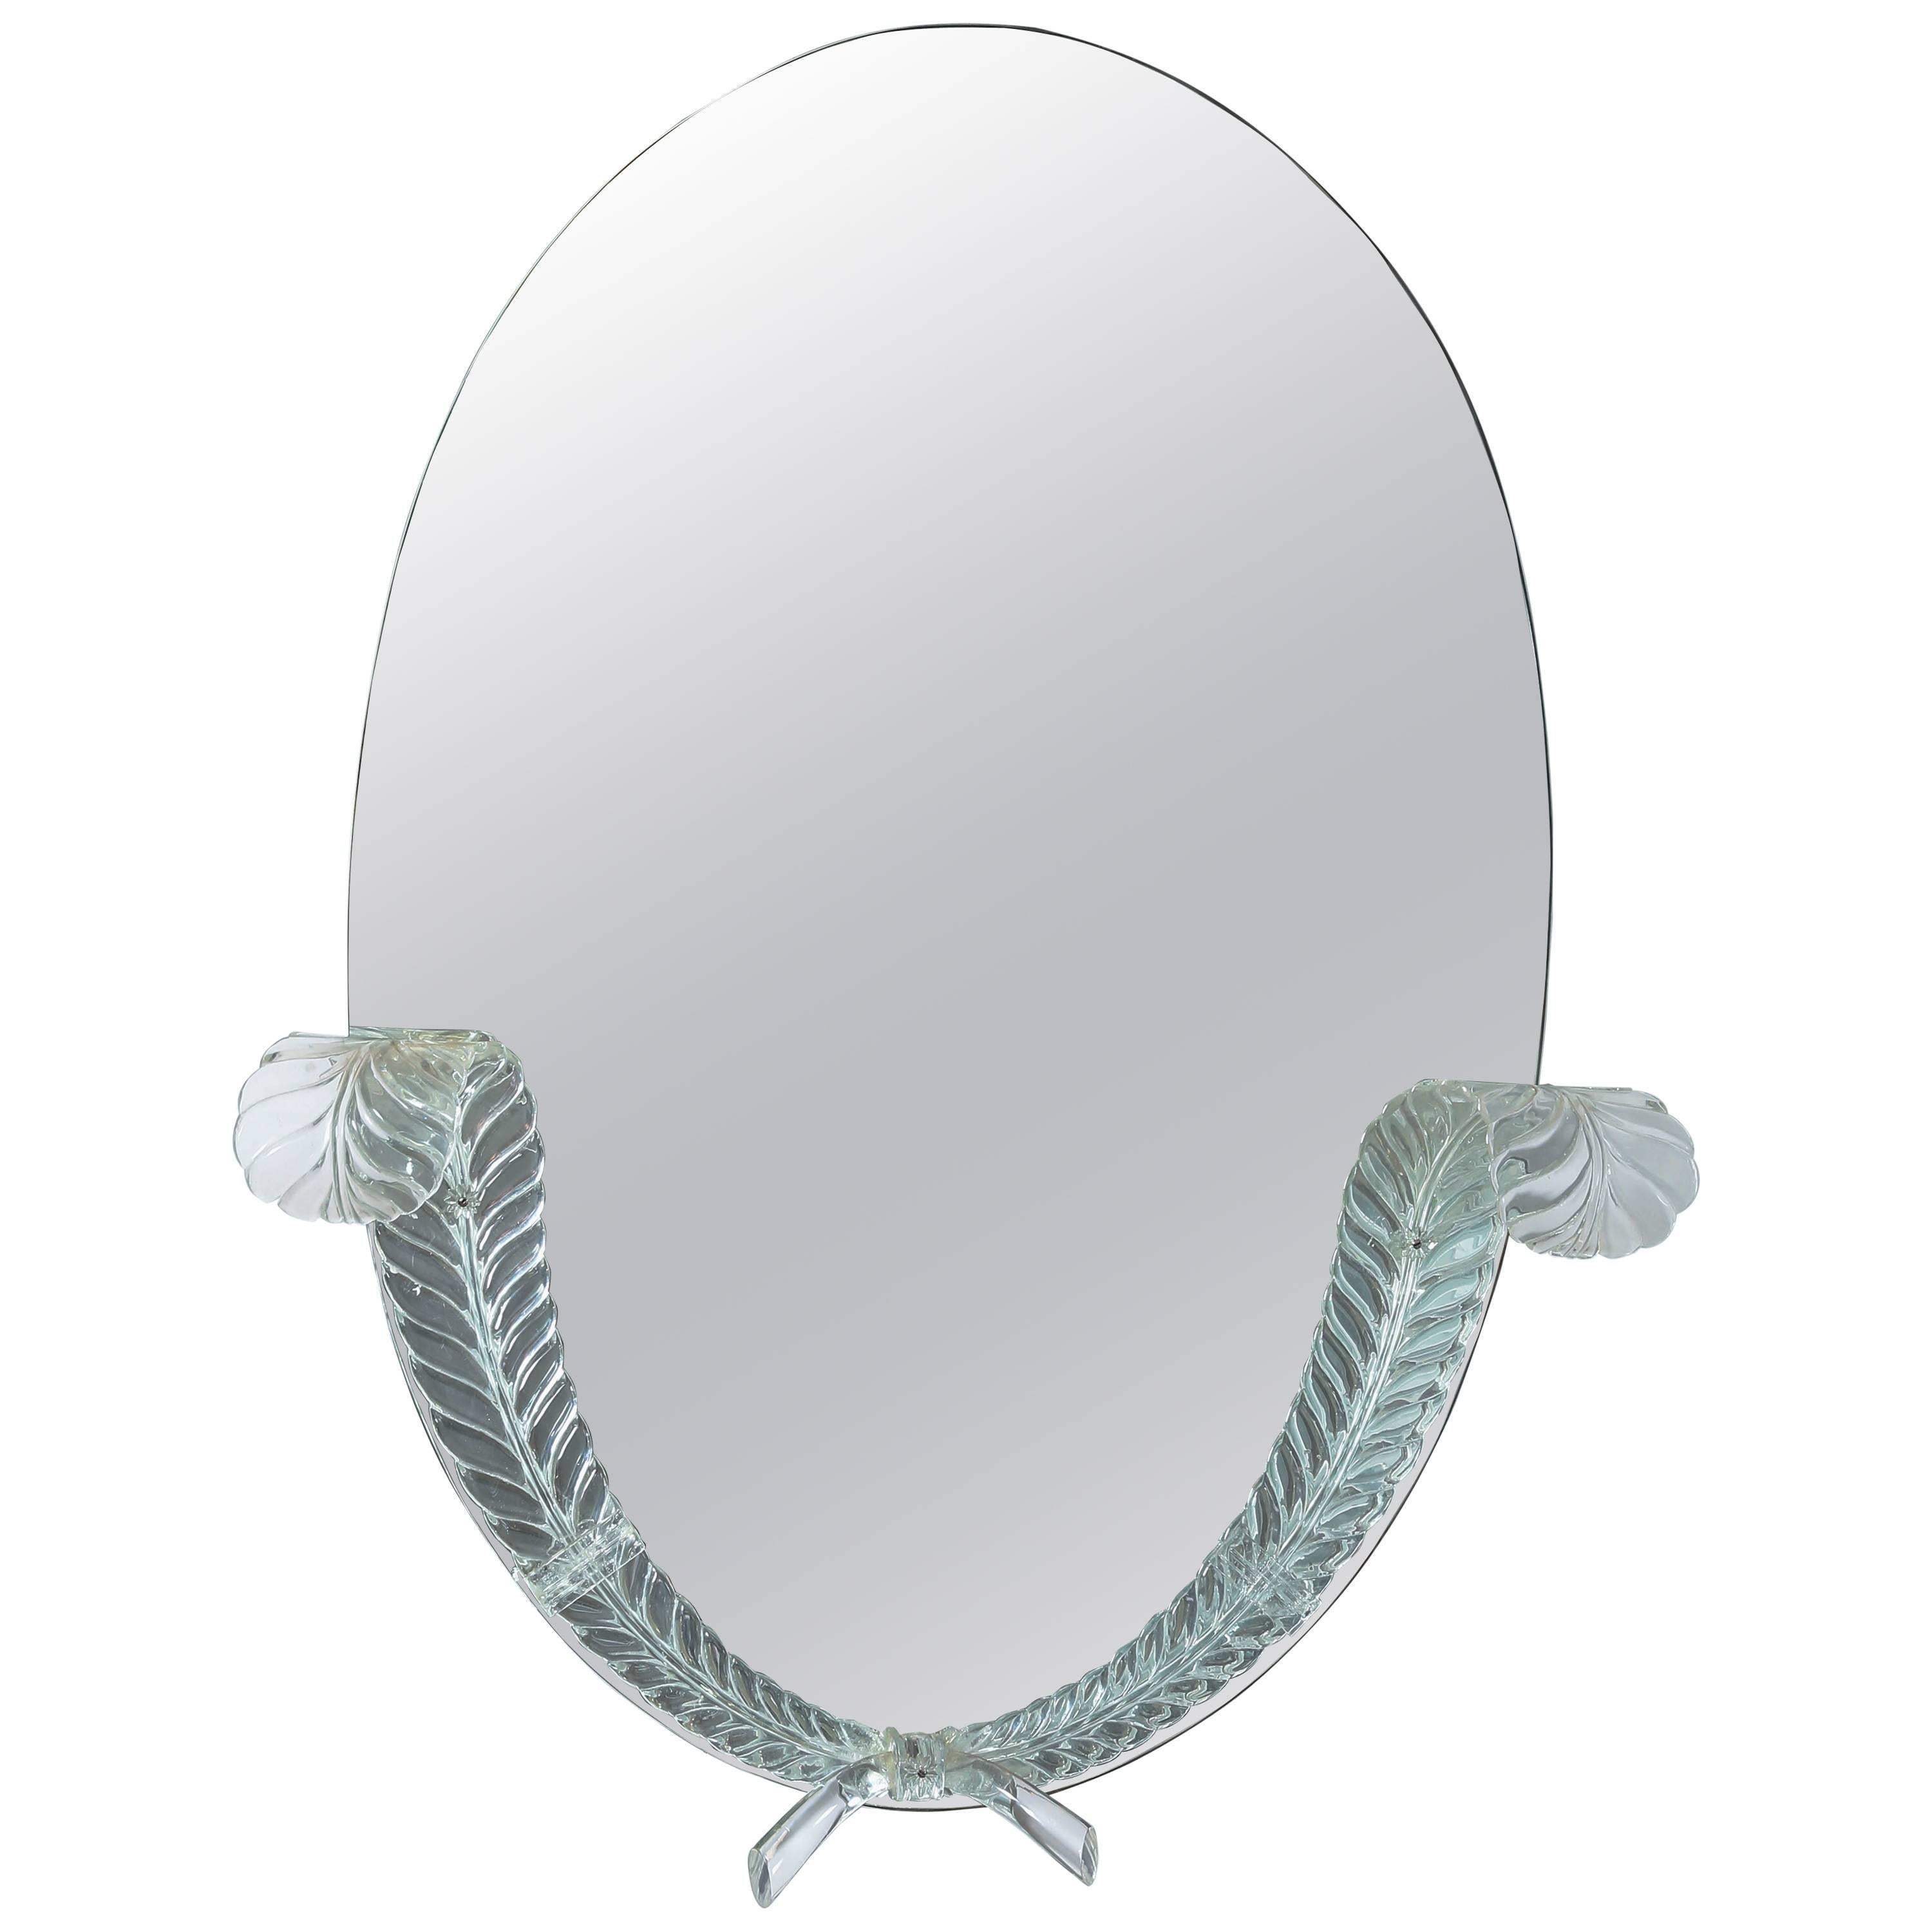 Lucite Detailed Oval Mirror by the "Grosfeld House" Company